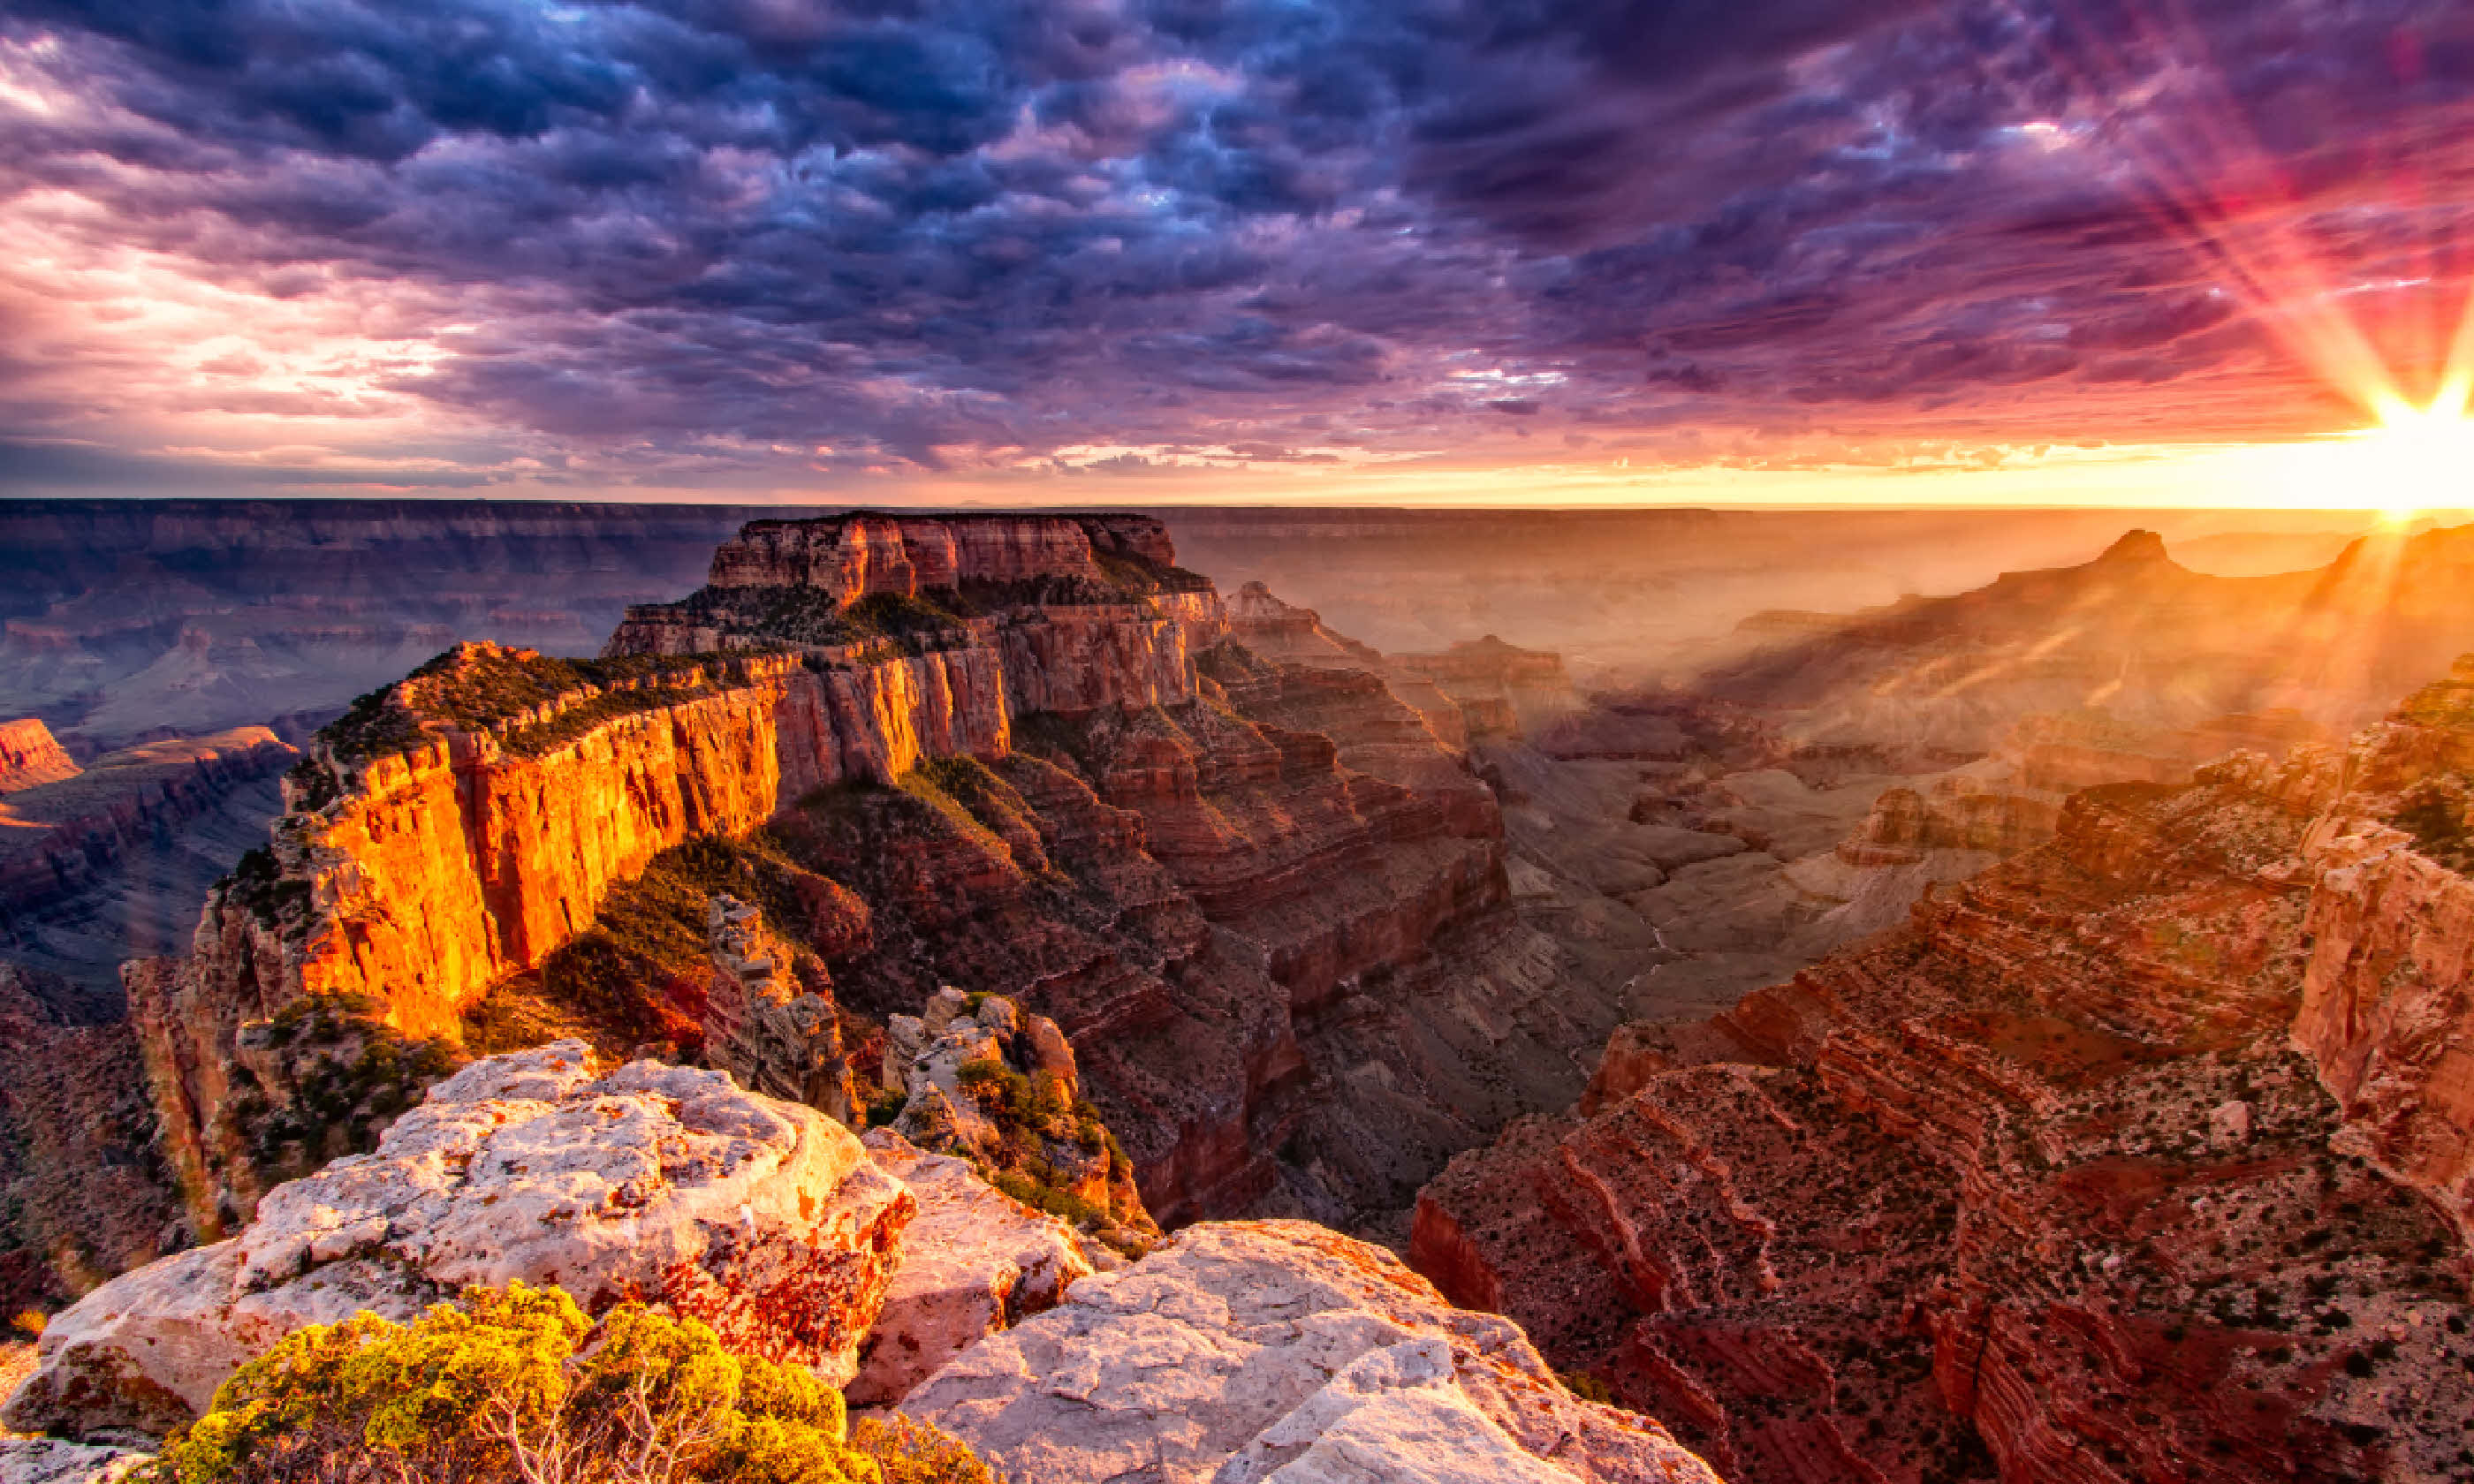 Grand Canyon (Shutterstock: see credit below)